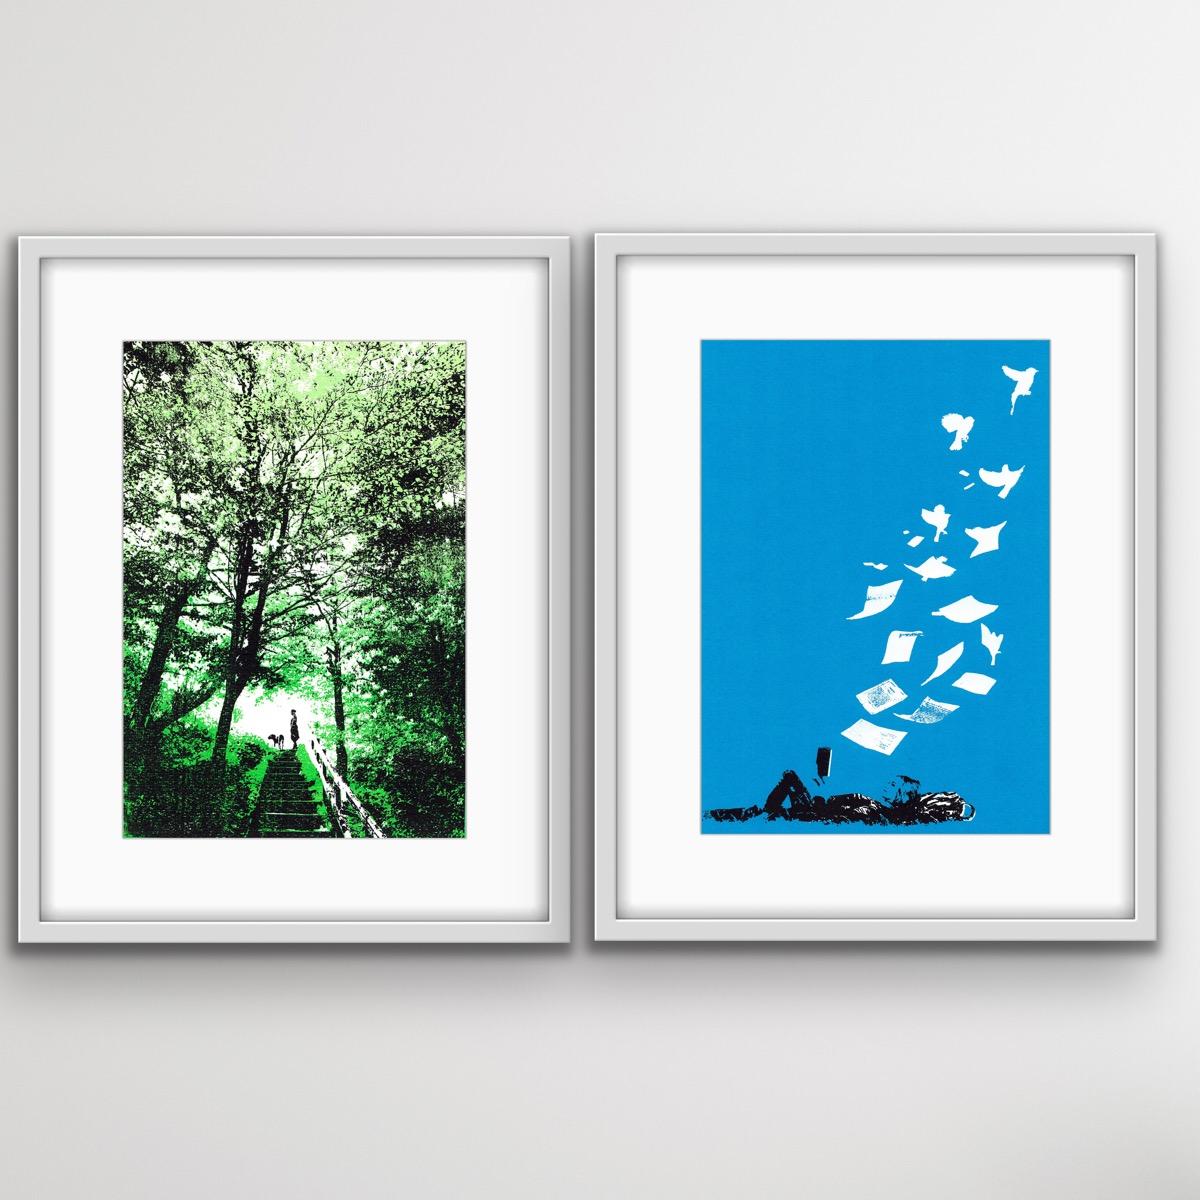 Katie Edwards Landscape Print - Woodland Walks and Flying Low Diptych